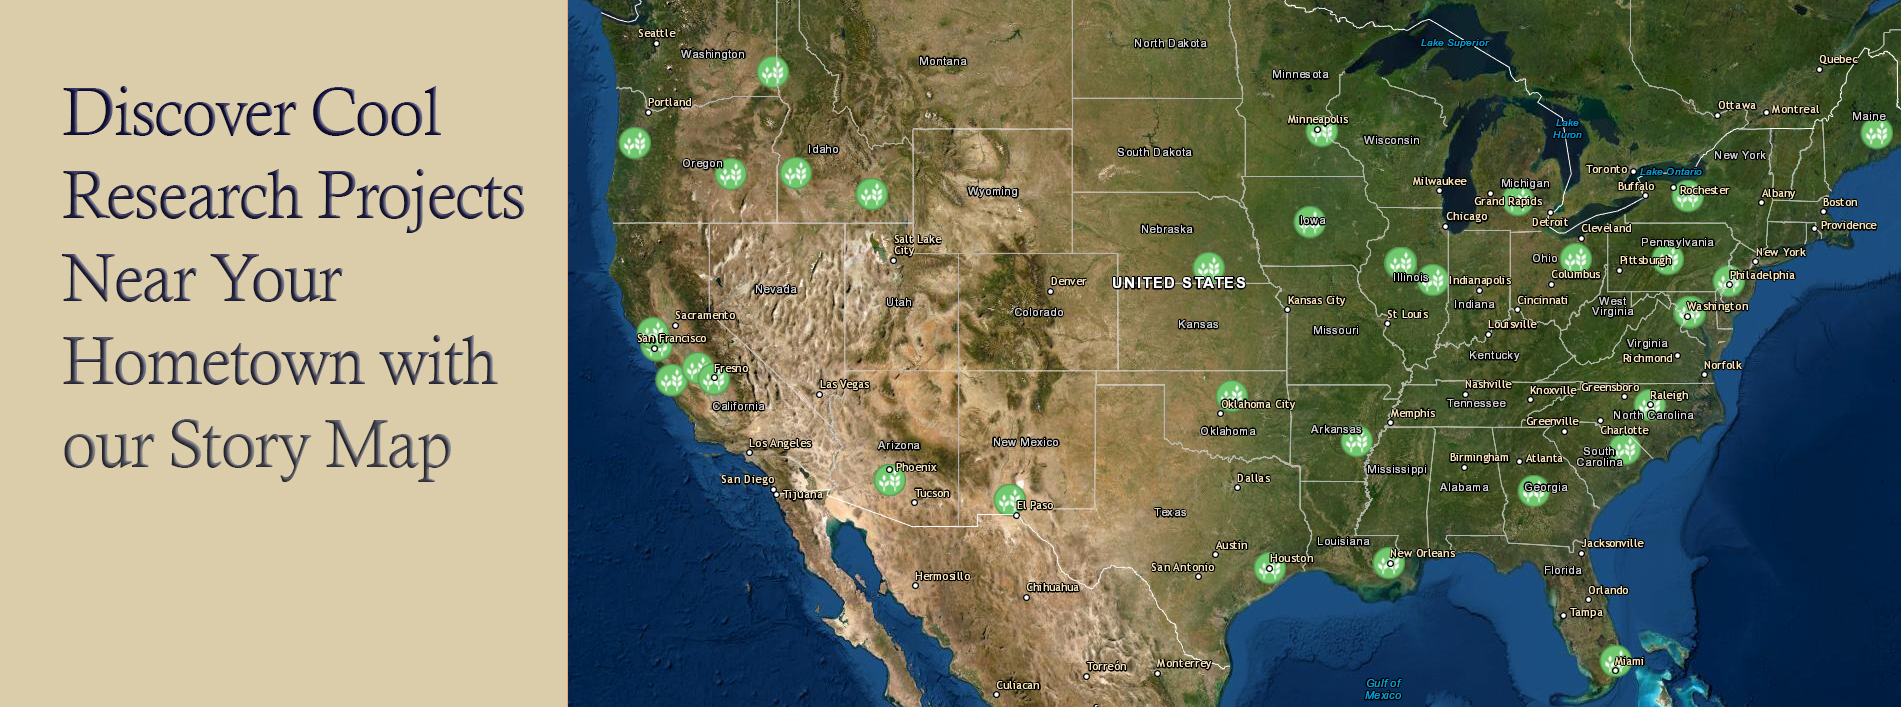 Map of the United States with green dots indicating an ARS research location. The image links to a  ArcGIS map with information about ARS research locations.